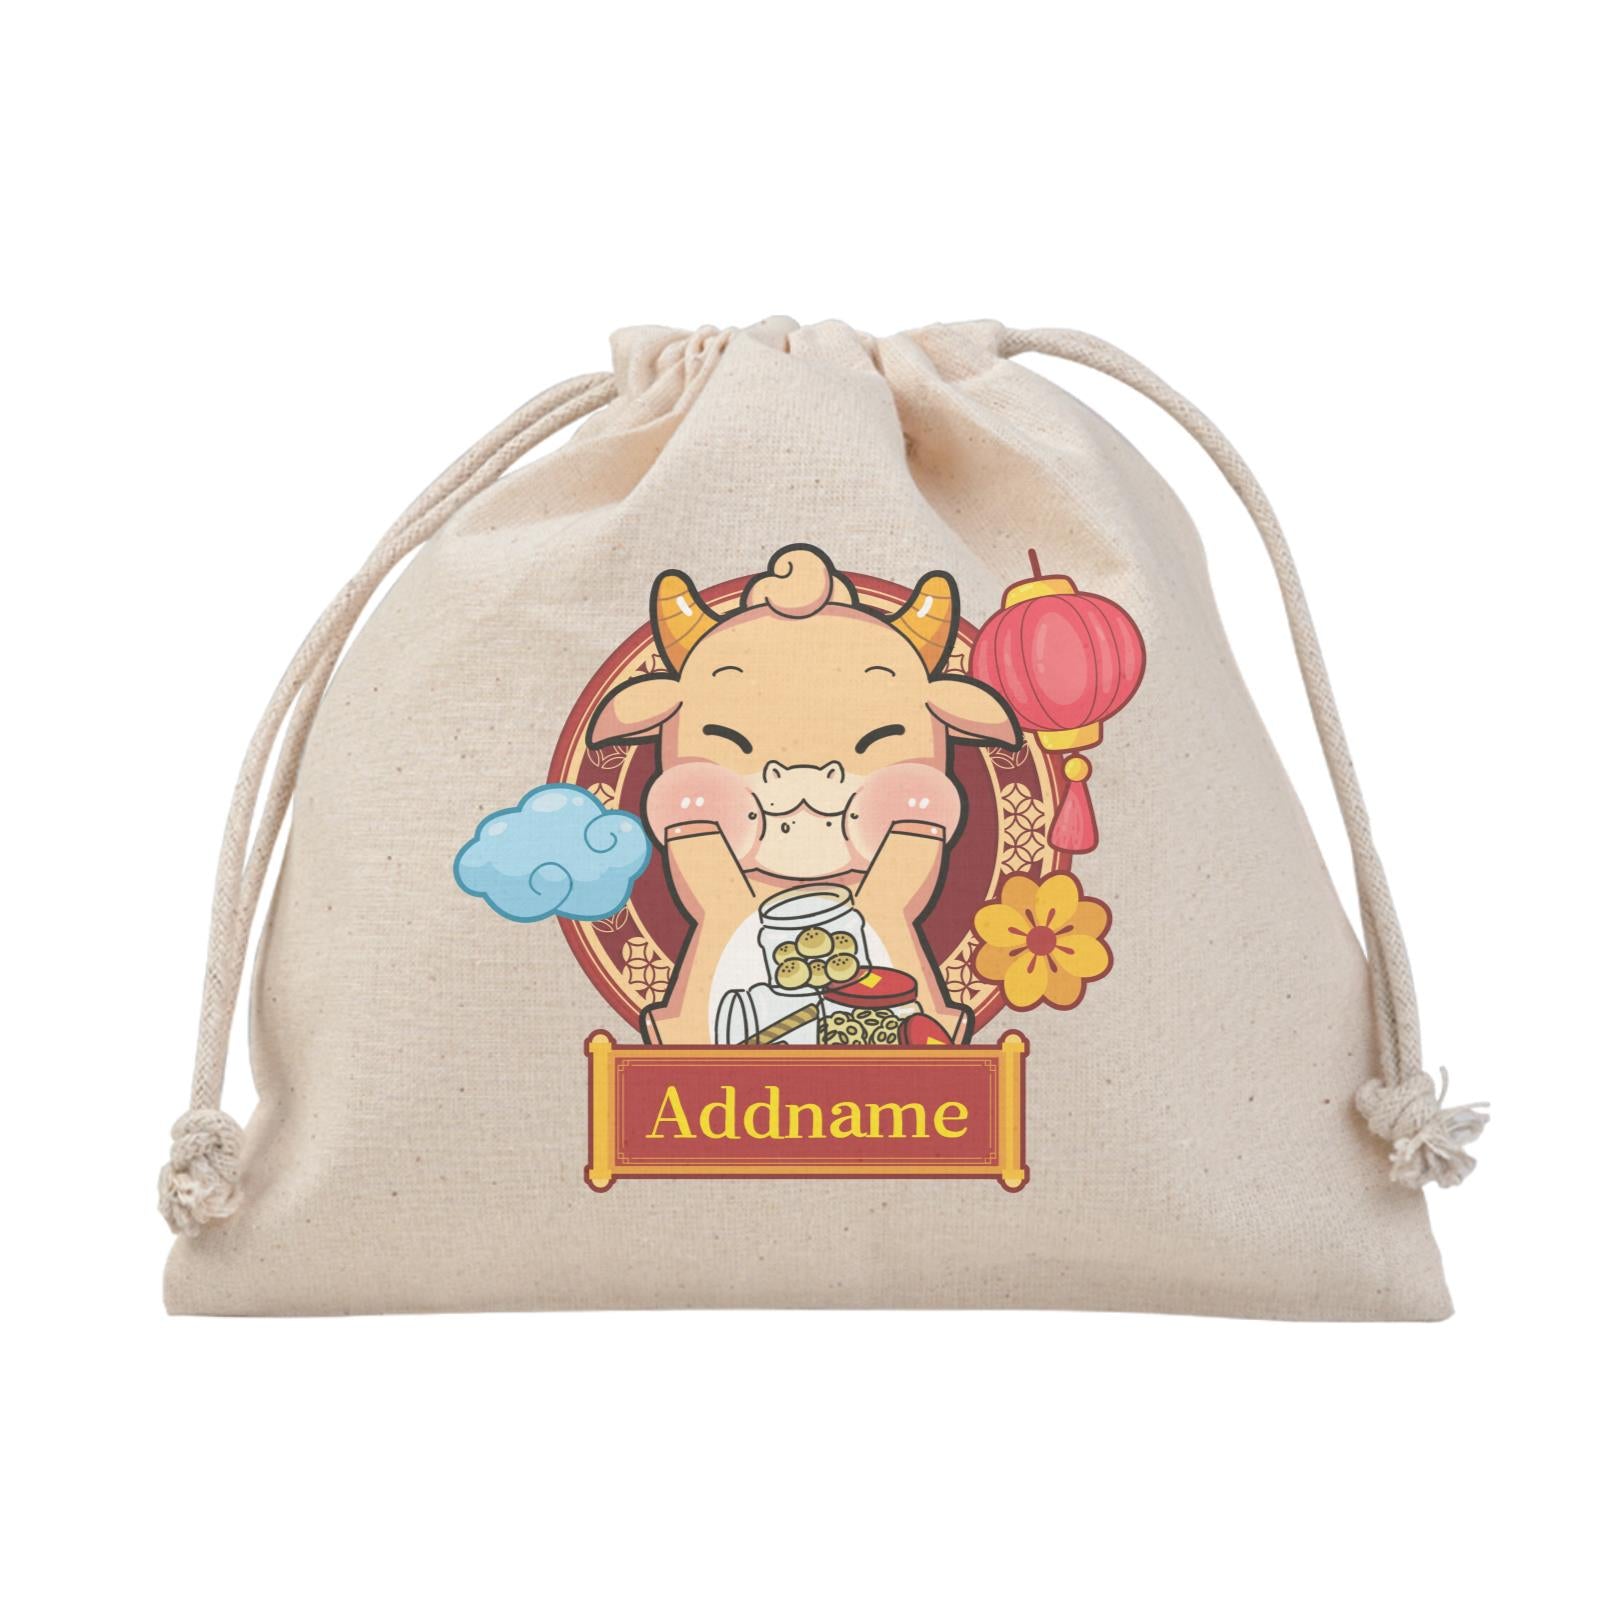 [CNY 2021] Golden Cow with New Year Treats Satchel